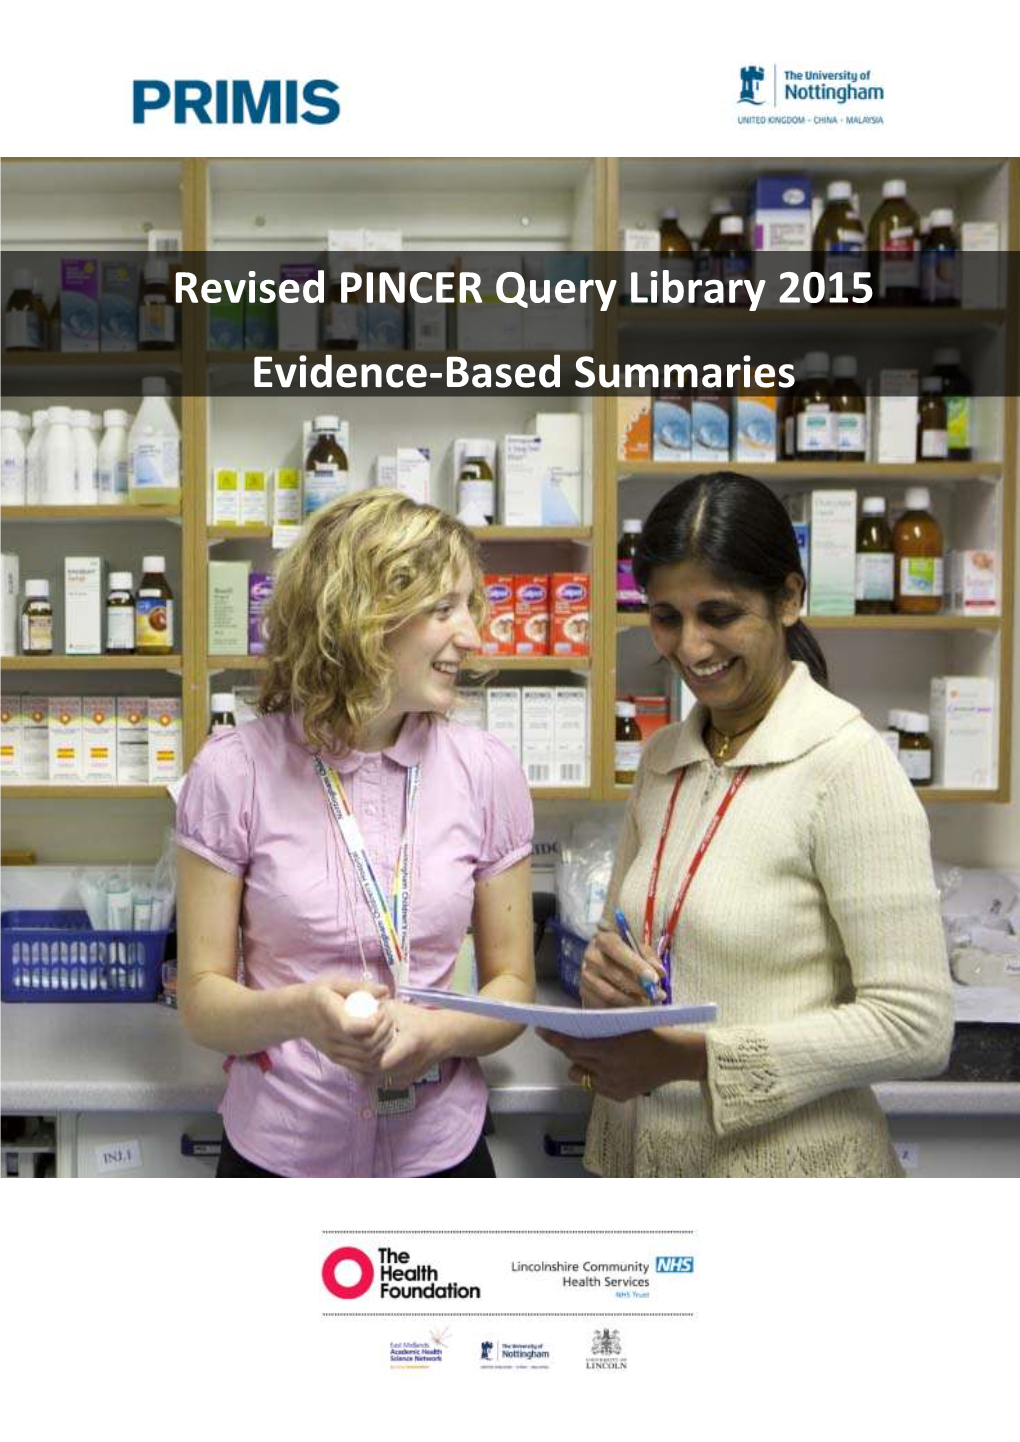 Revised PINCER Query Library 2015 Evidence-Based Summaries